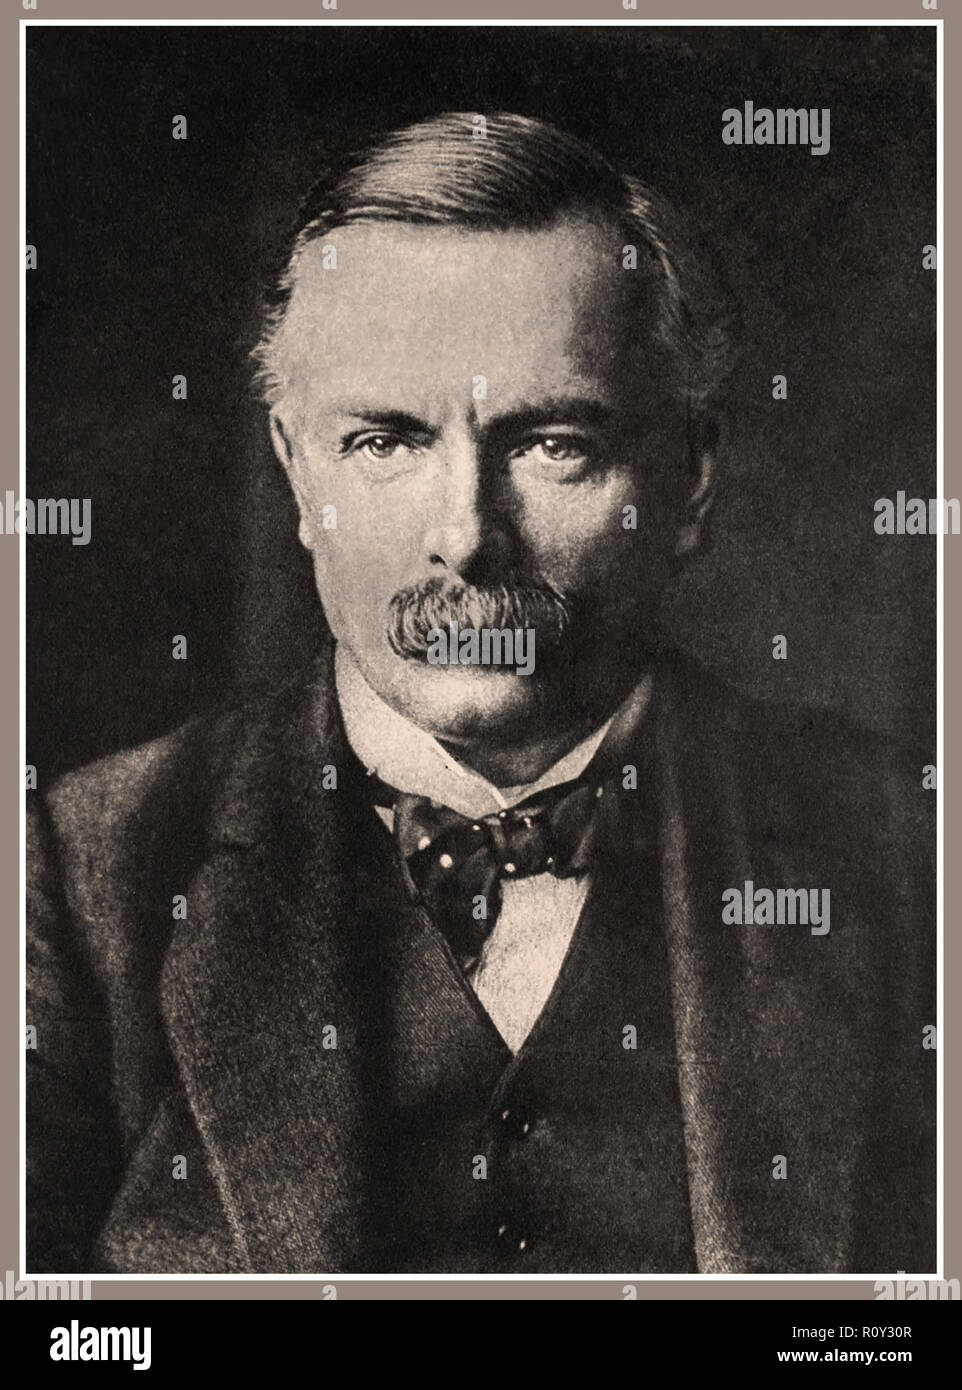 David Lloyd George, 1st Earl Lloyd-George of Dwyfor, OM, PC was a British statesman of the Liberal Party and the final Liberal to serve as Prime Minister David Lloyd George 1915 British prime minister 1916-1922. Stock Photo